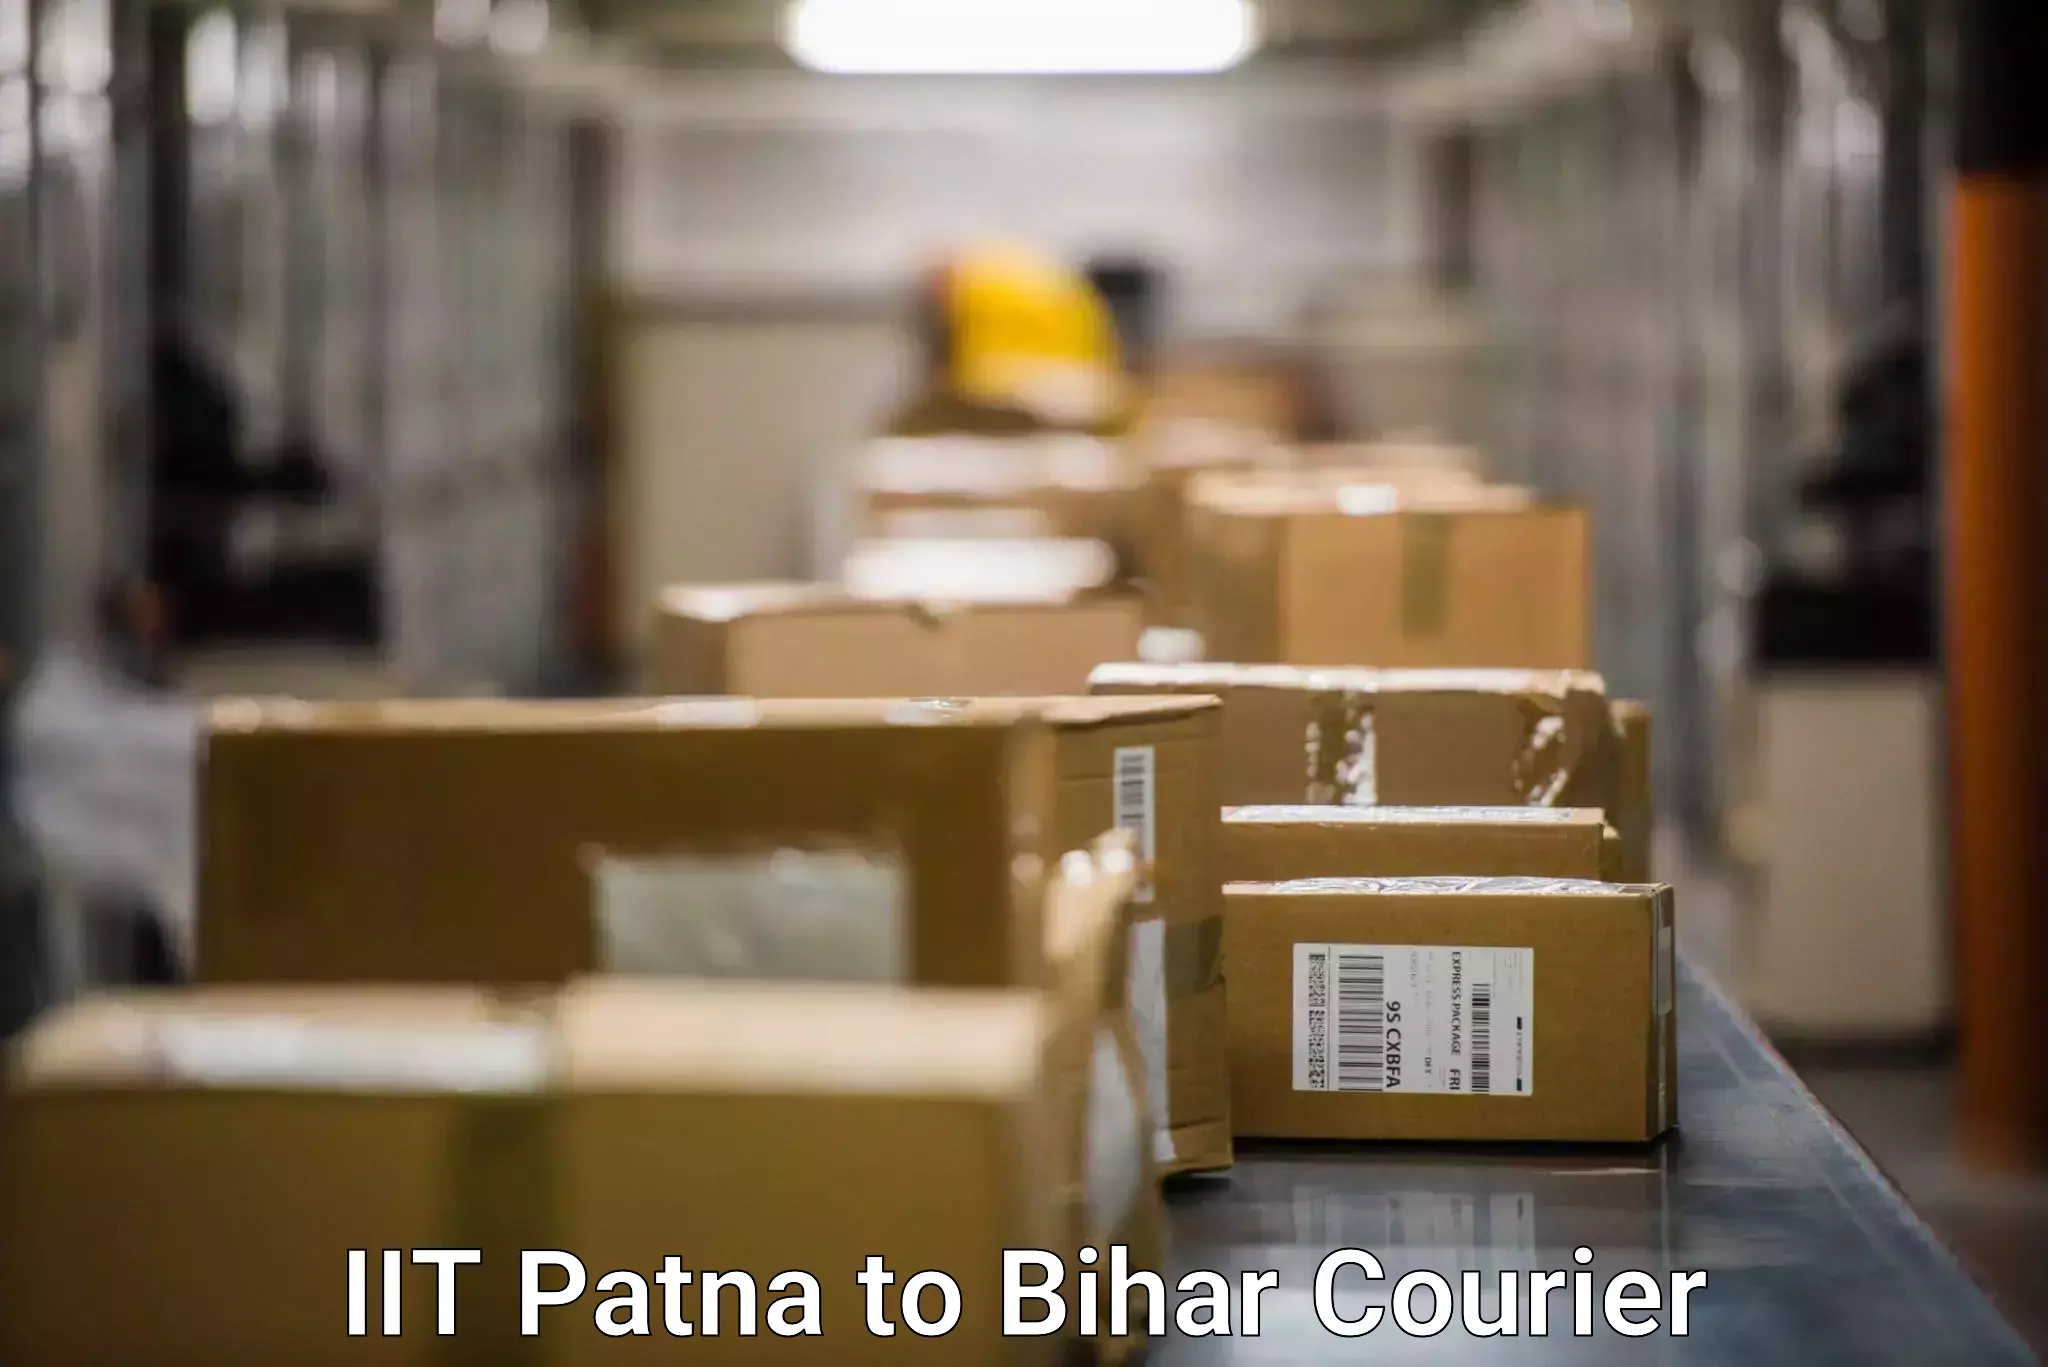 Courier rate comparison IIT Patna to Kamtaul